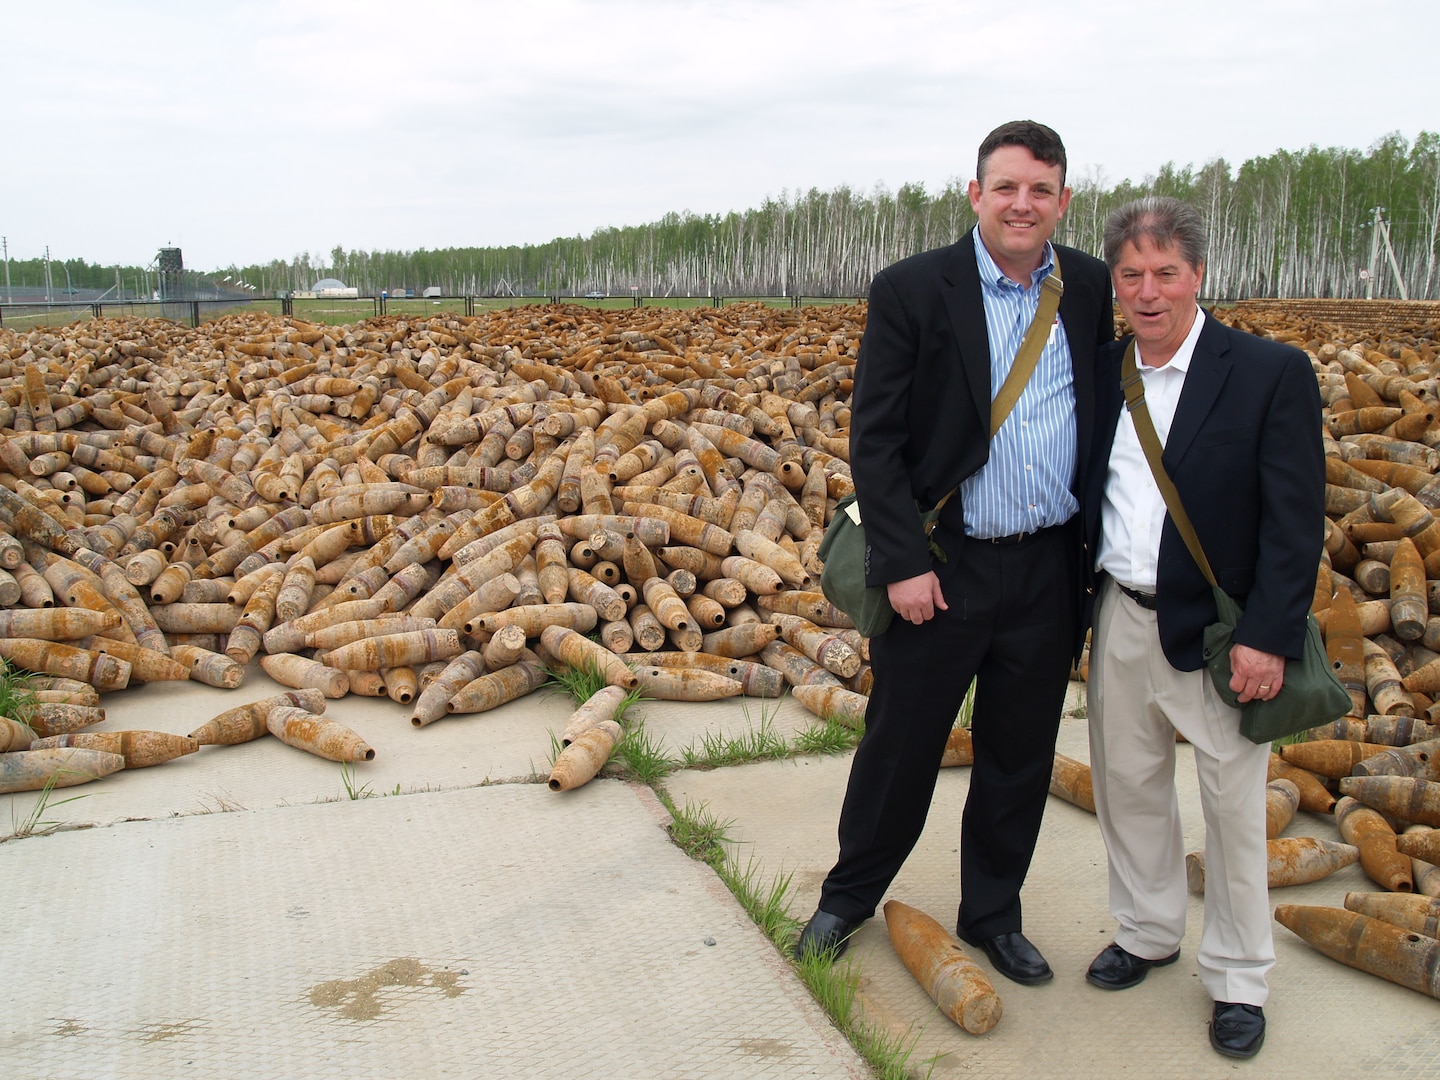 Scott Crow (left) and Paul McNelly stand in front of a stockpile of destroyed chemical weapons munitions in Russia in 2011.